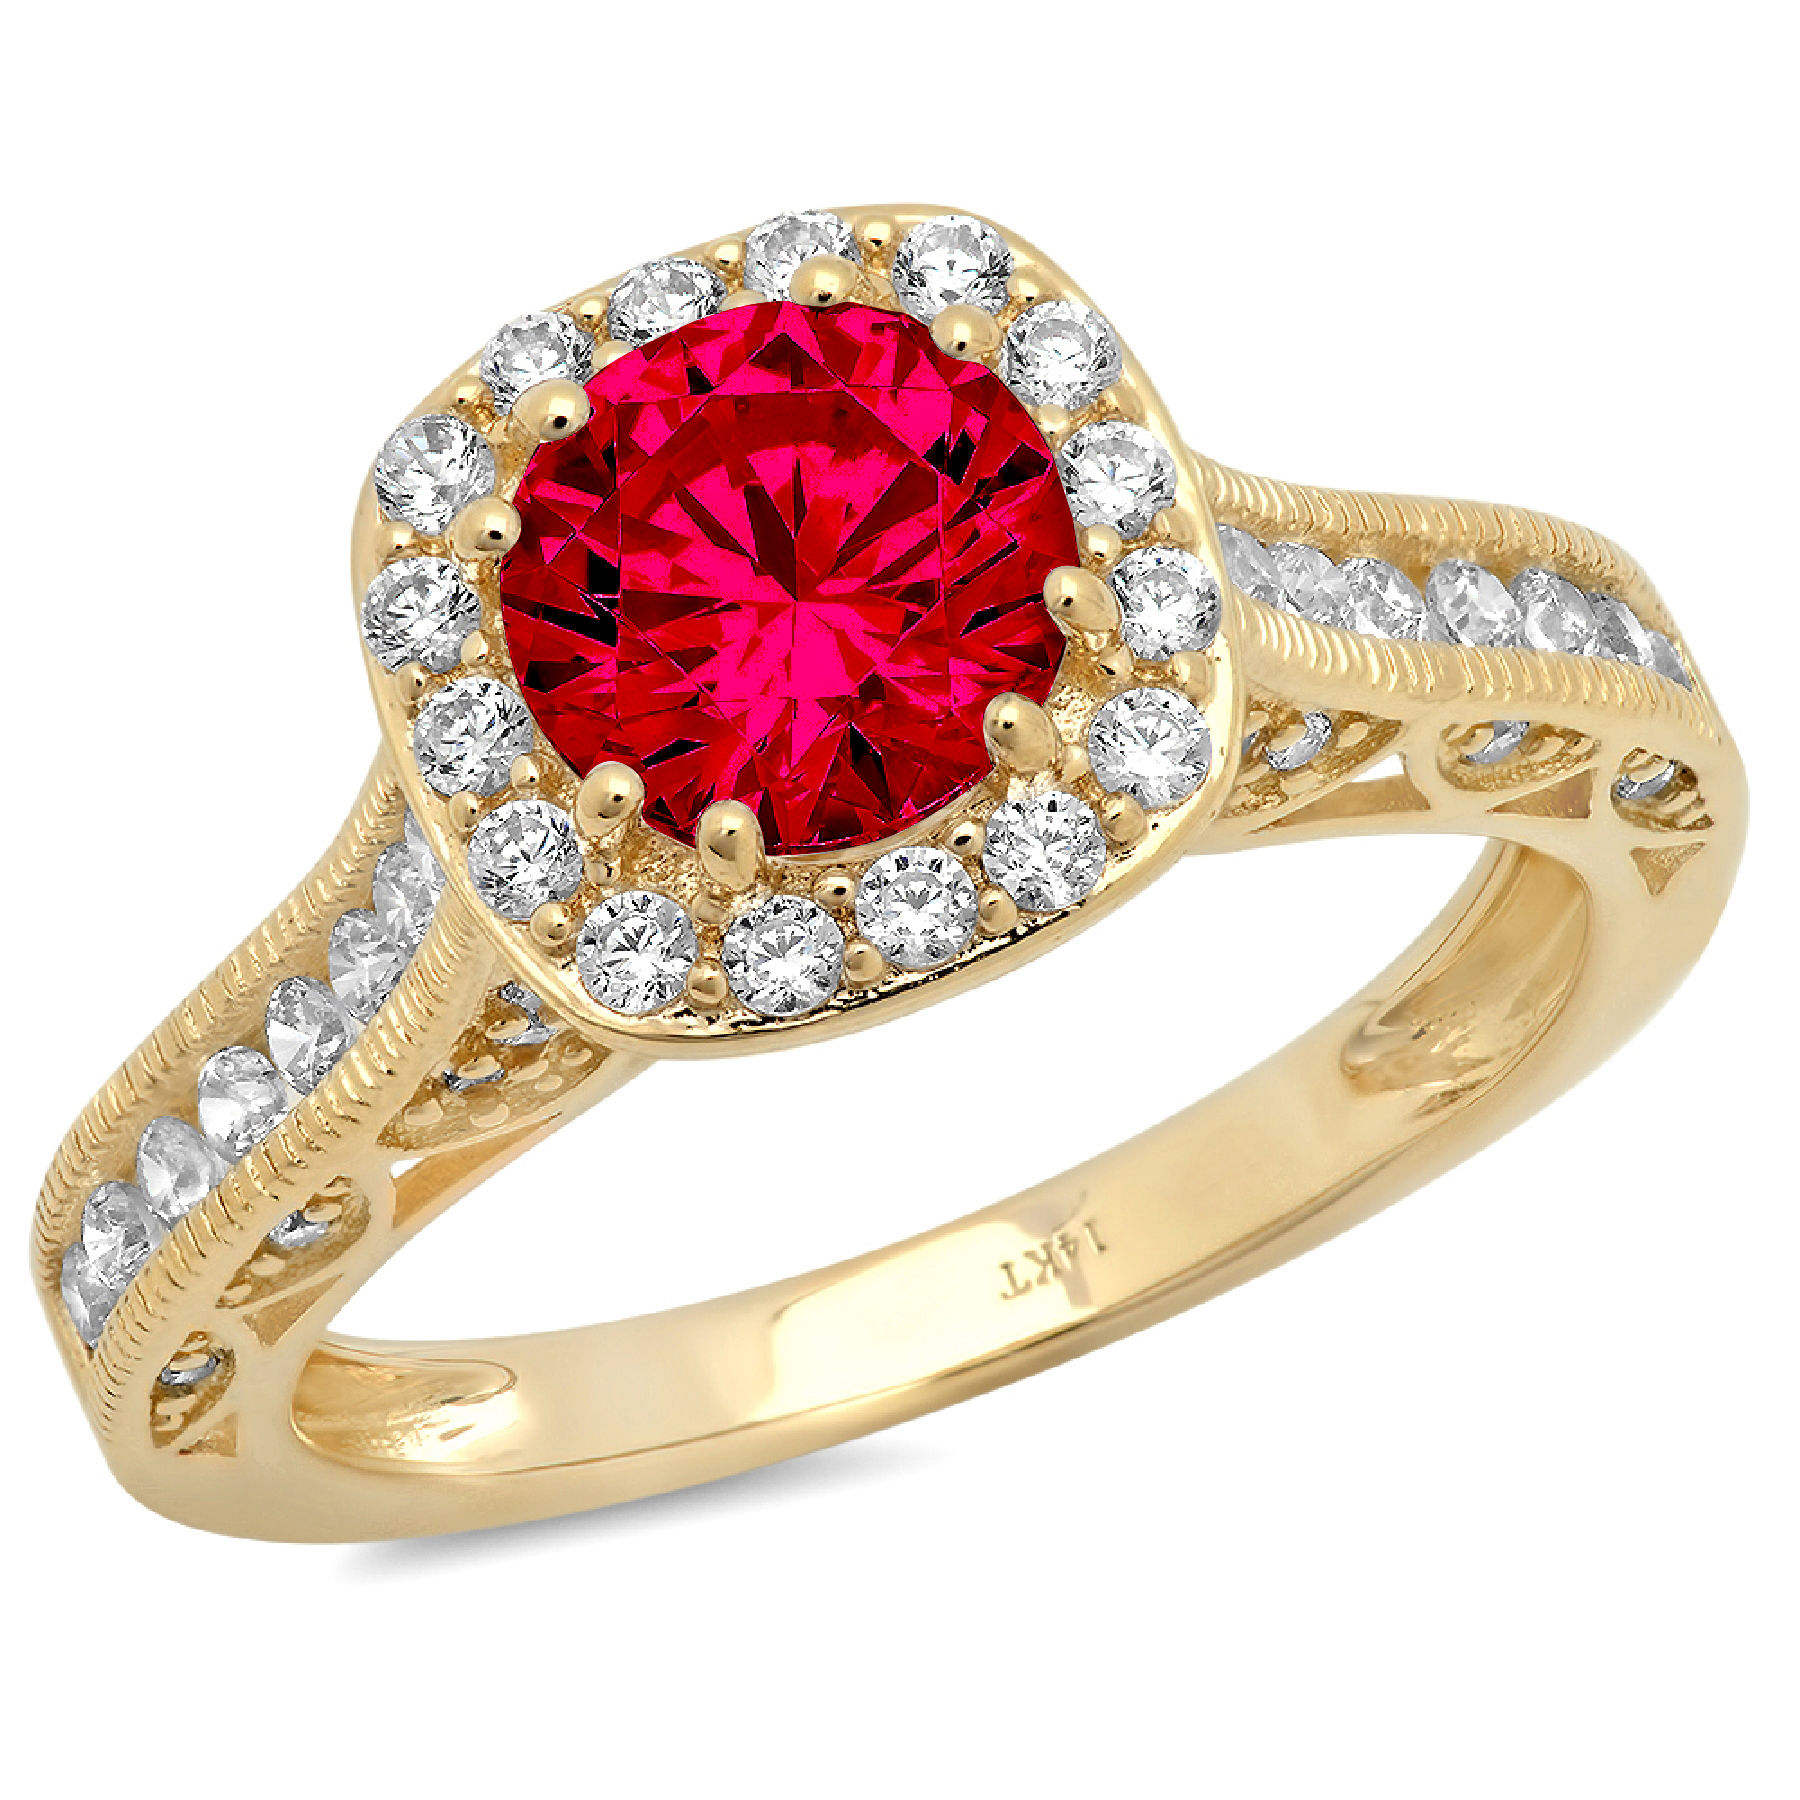 Pre-owned Pucci 1.95 Round Halo Simulated Ruby Classic Bridal Statement Ring 14k Yellow Gold In Red